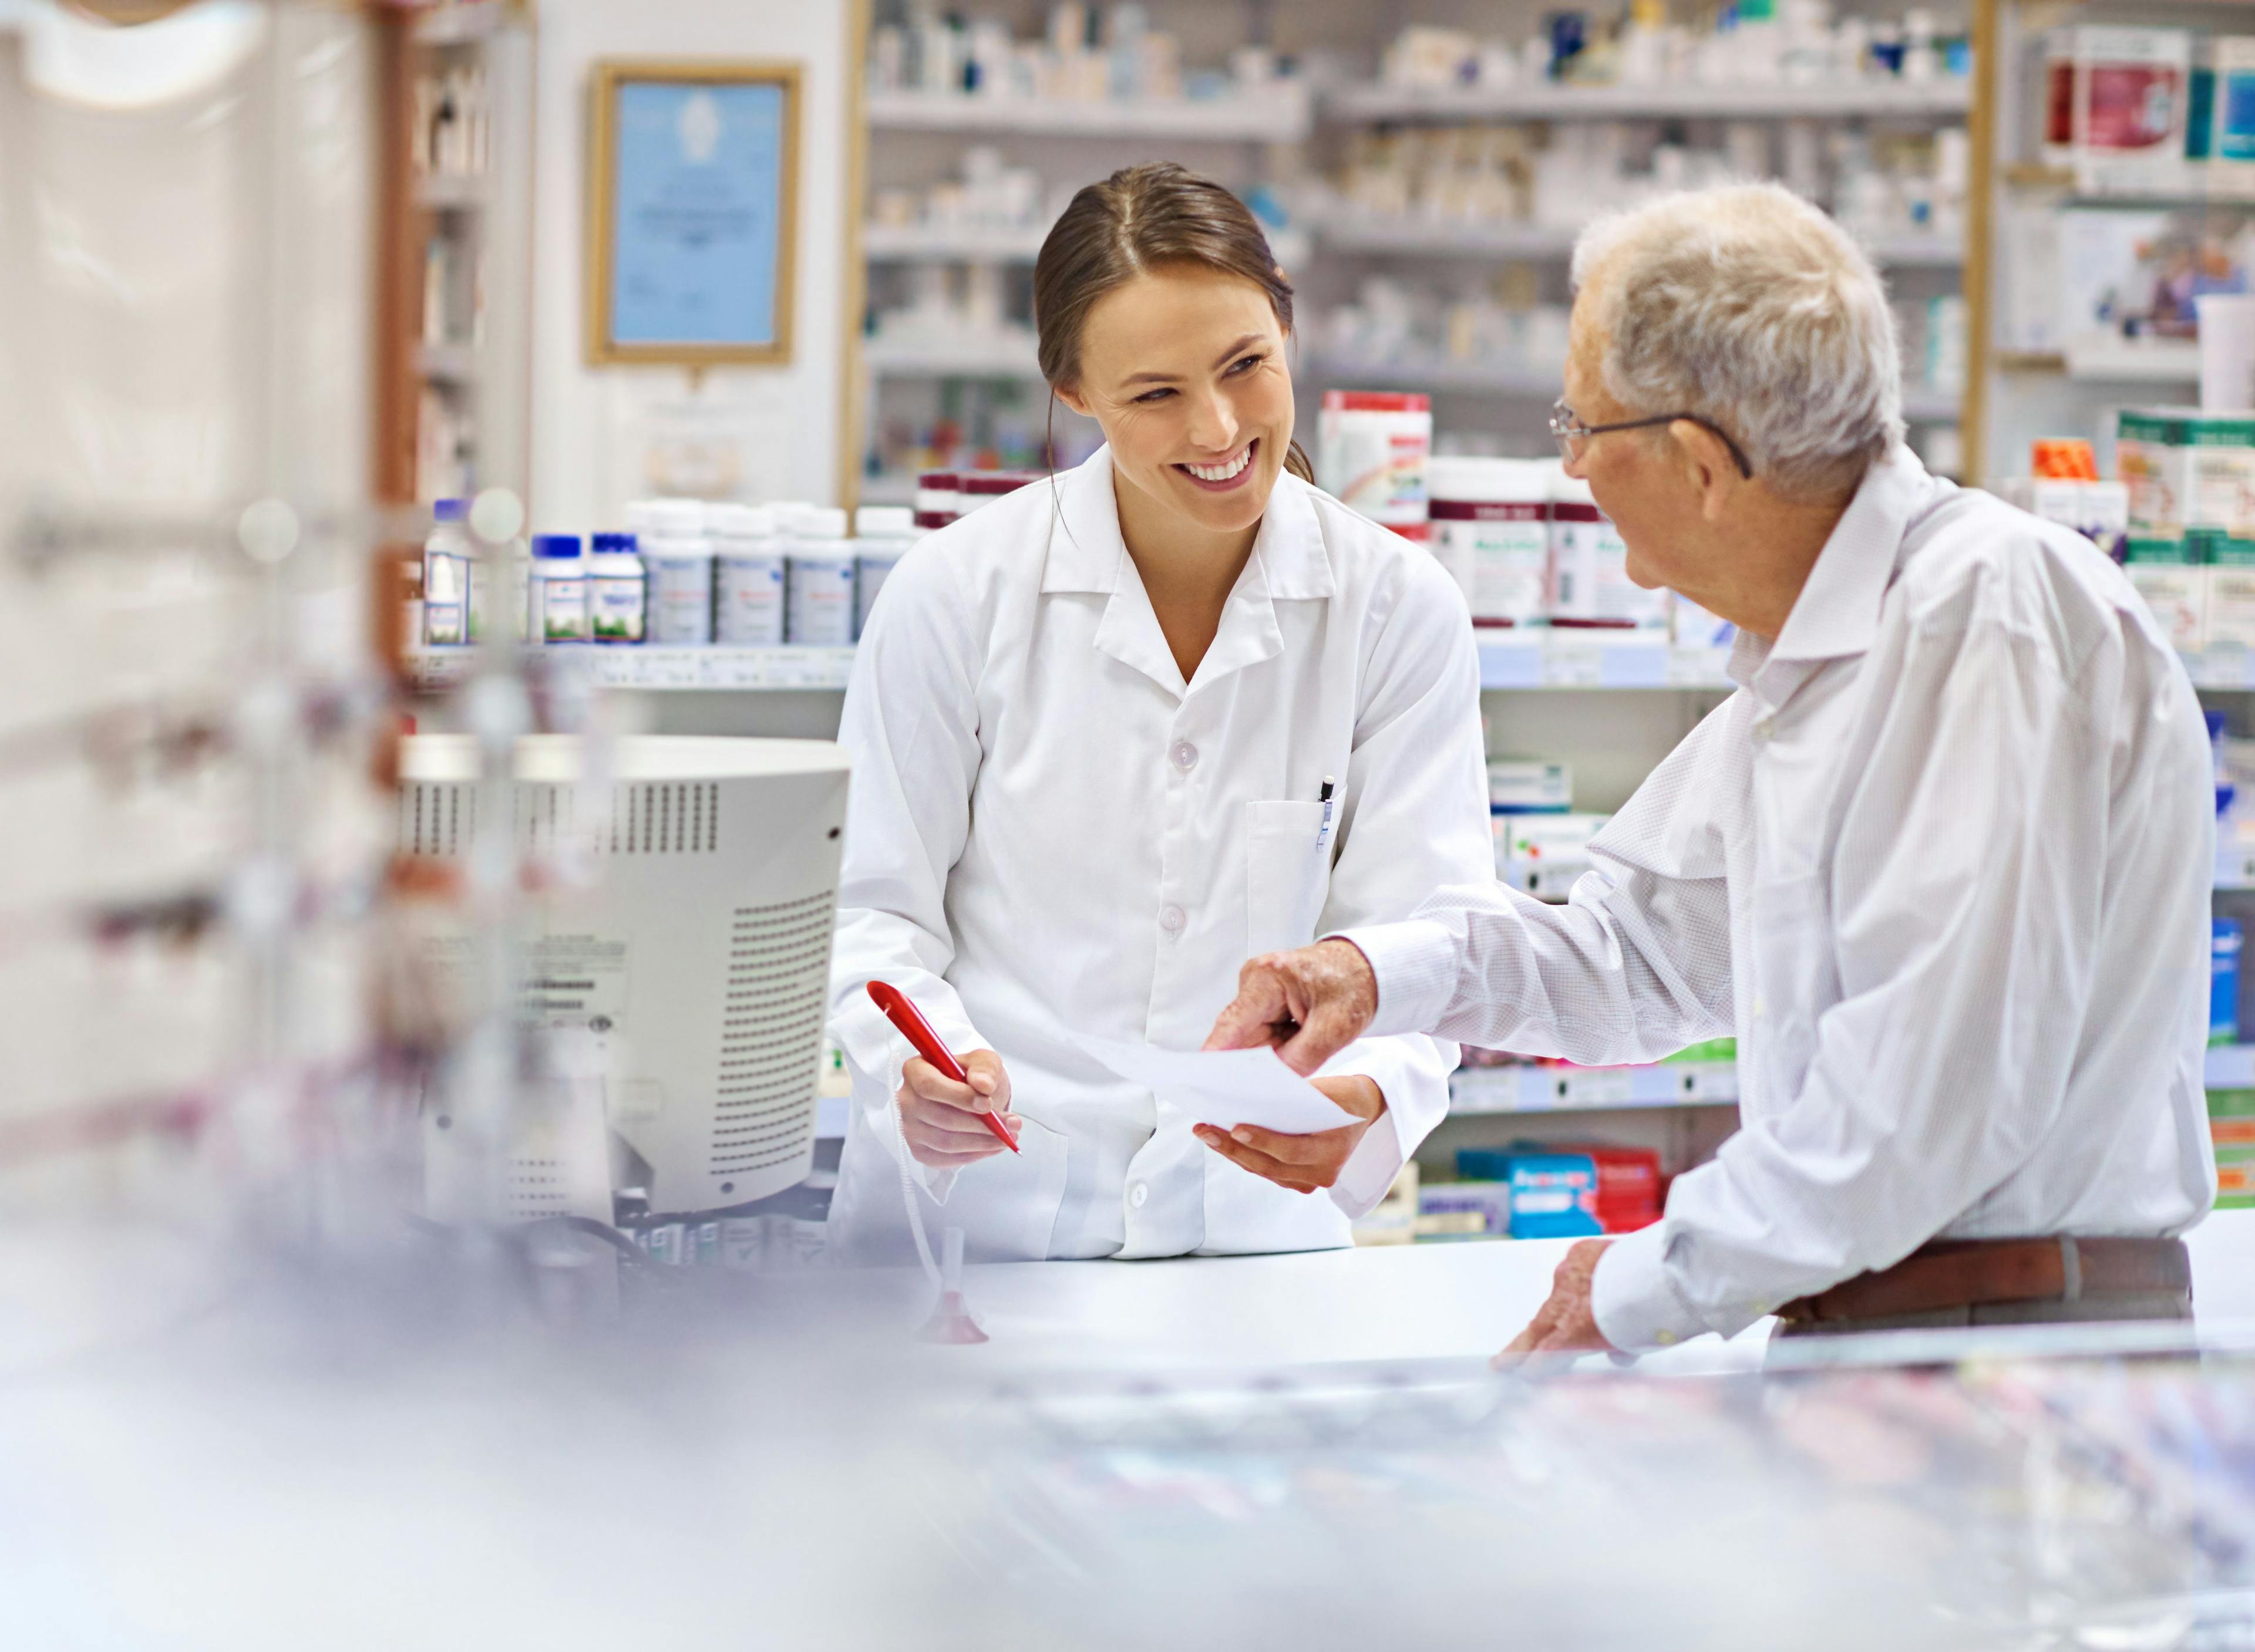 Pharmacist helping a patient -- Image credit: Yuri Arcurs/peopleimages.com | stock.adobe.com